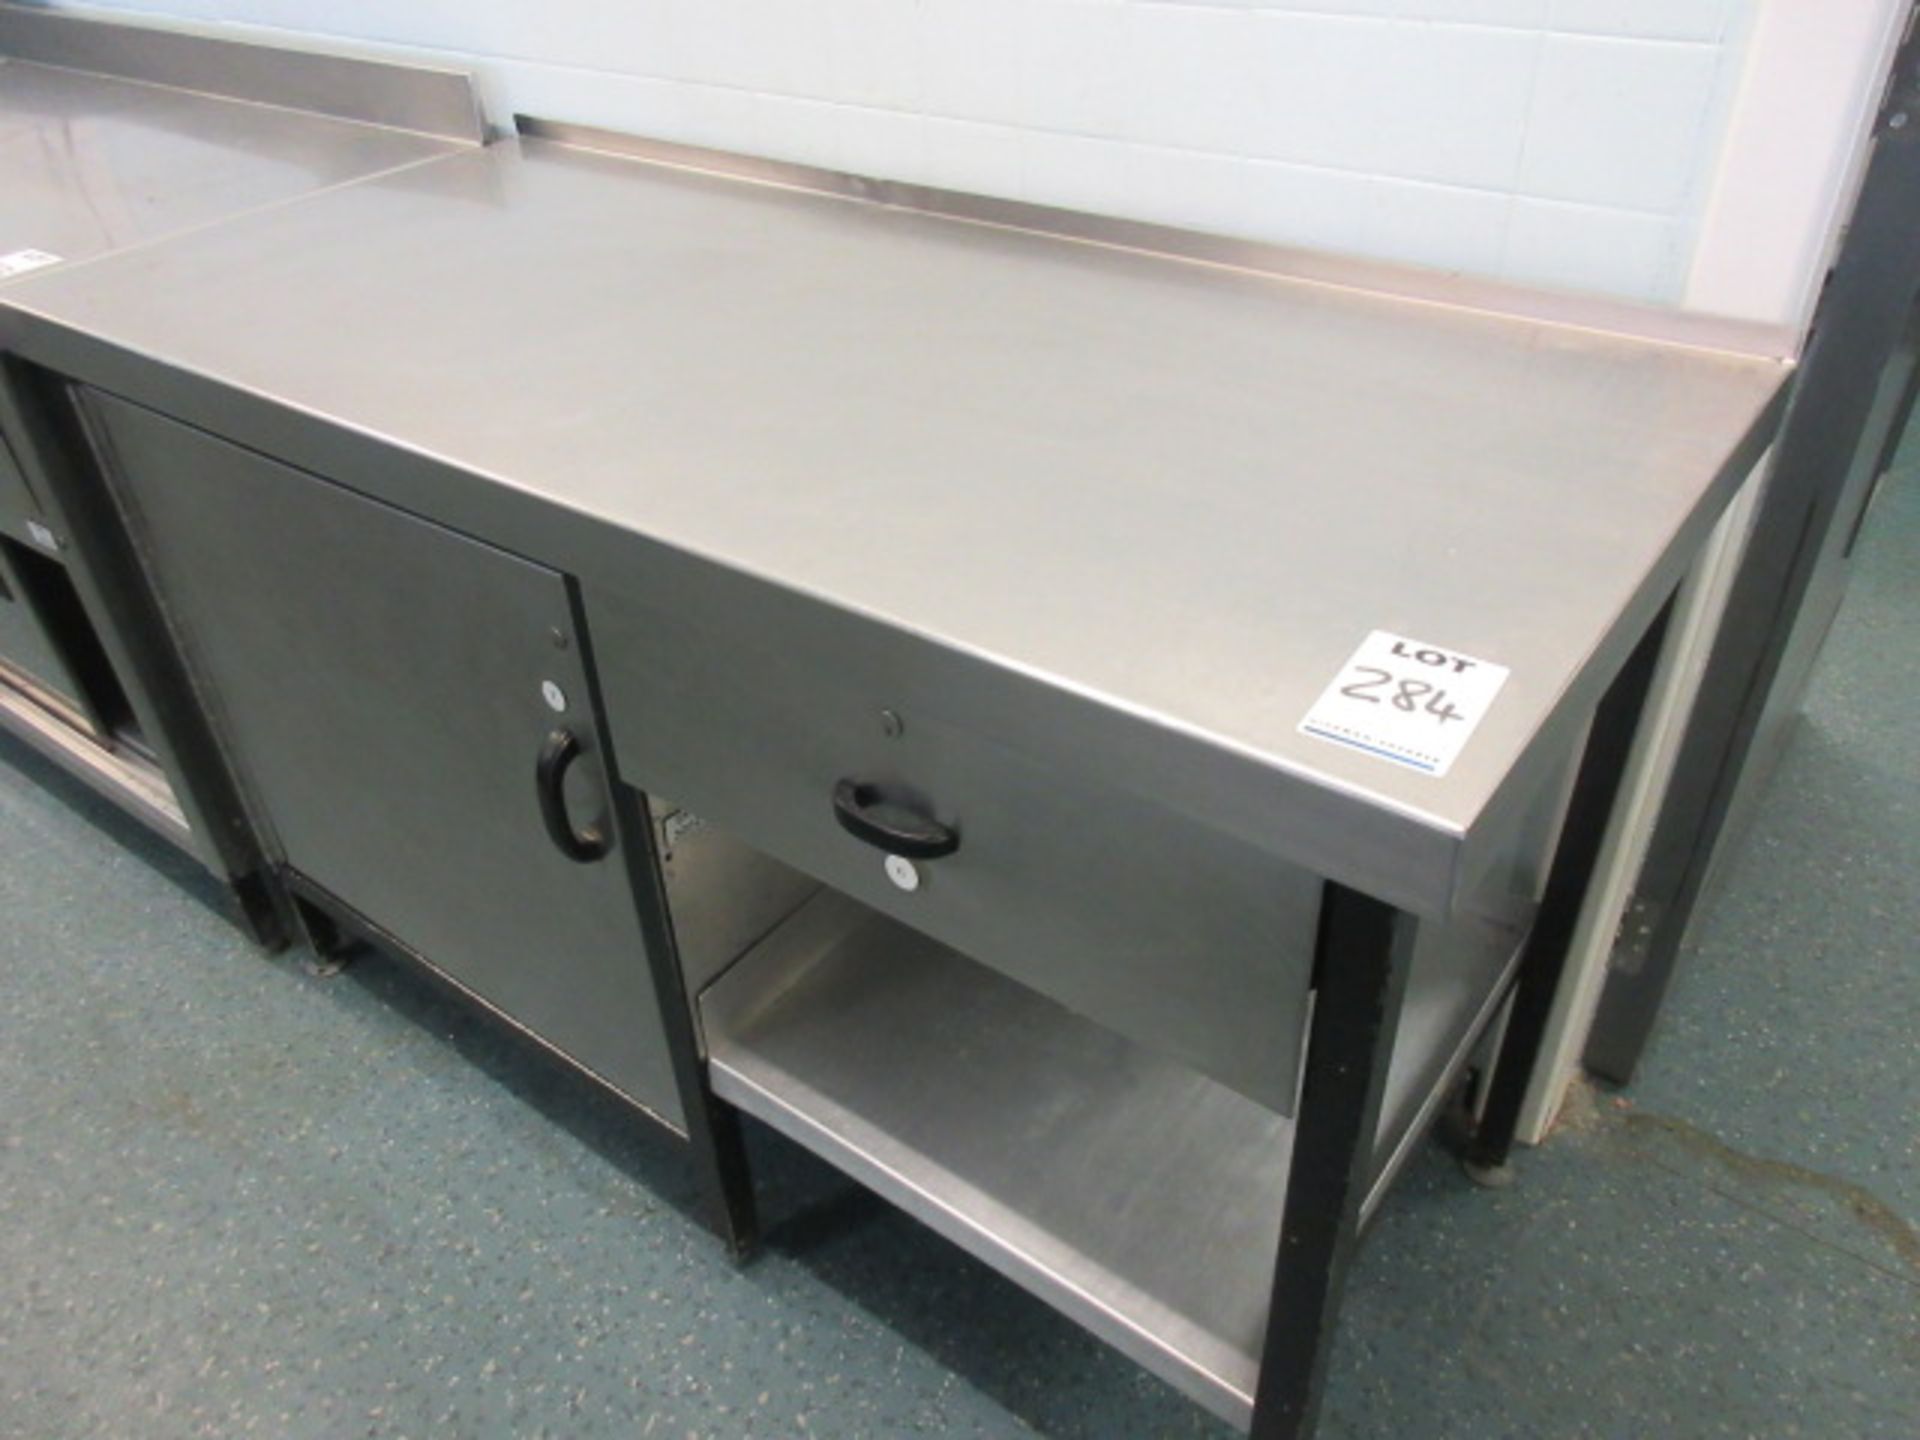 STAINLESS STEEL STORAGE COUNTER/WORKTOP 1400 mm LONG X 600 mm - Image 2 of 3